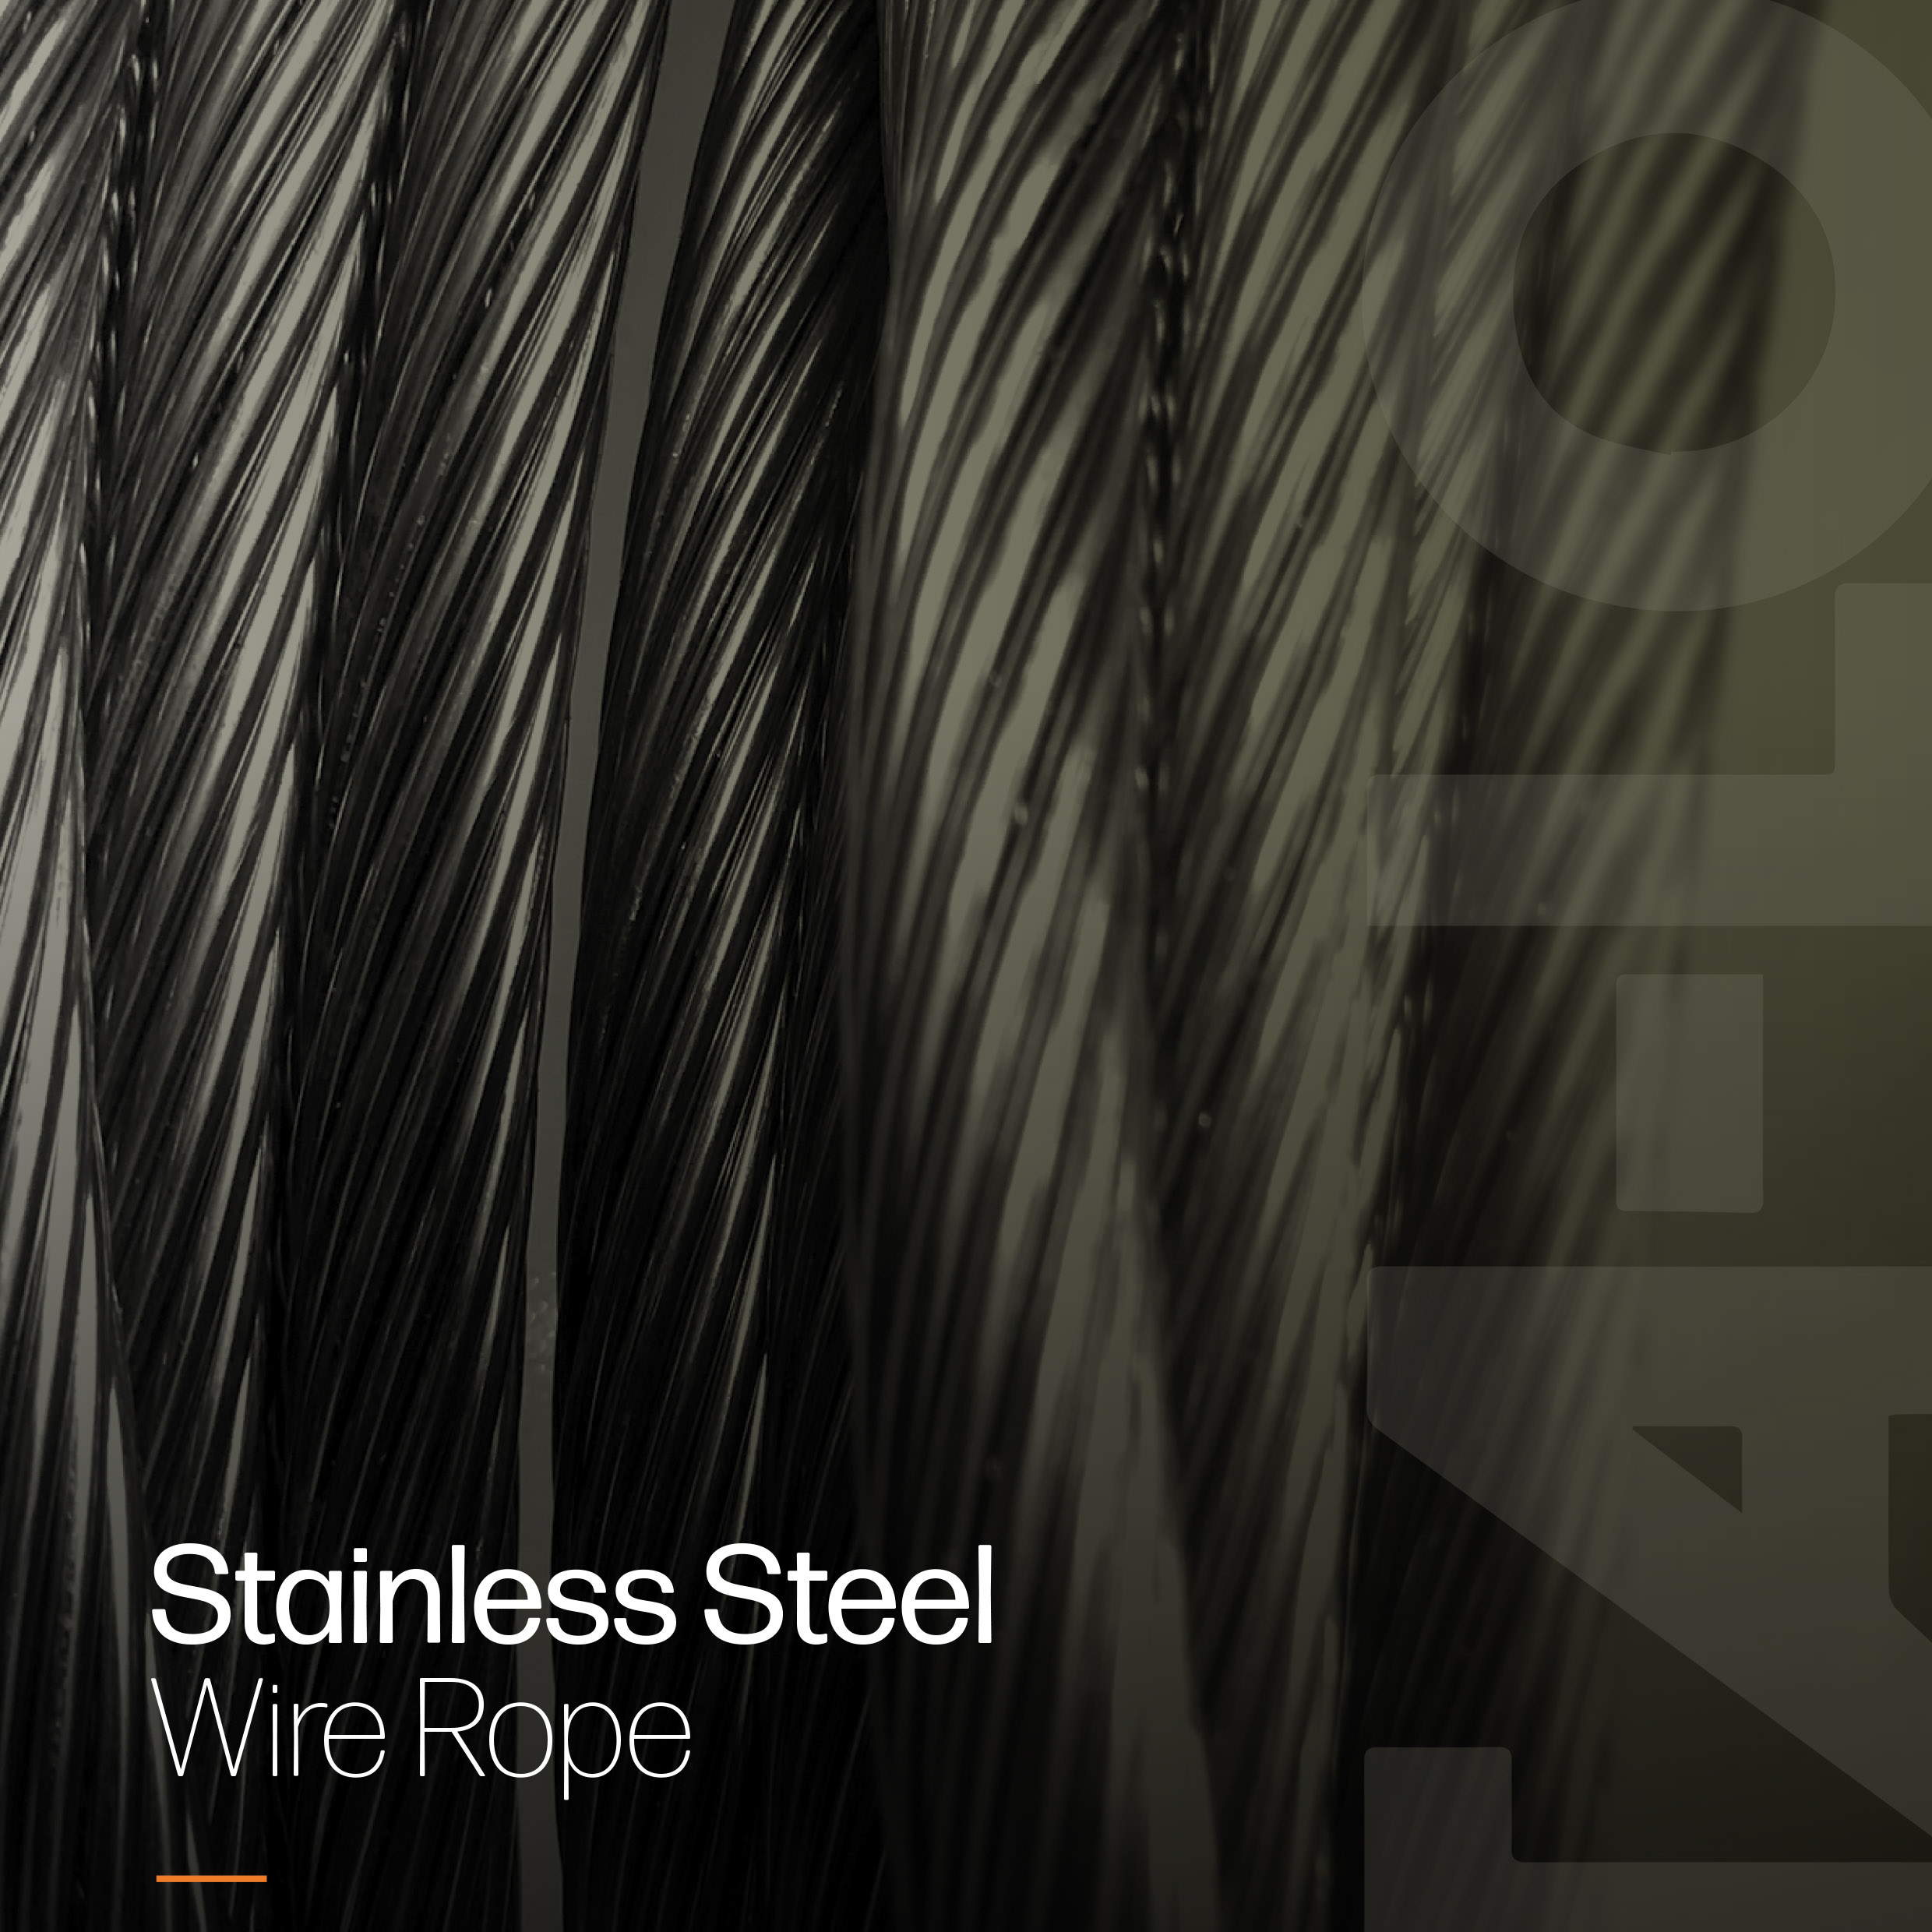 Stainless Steel Wire Rope Brochure